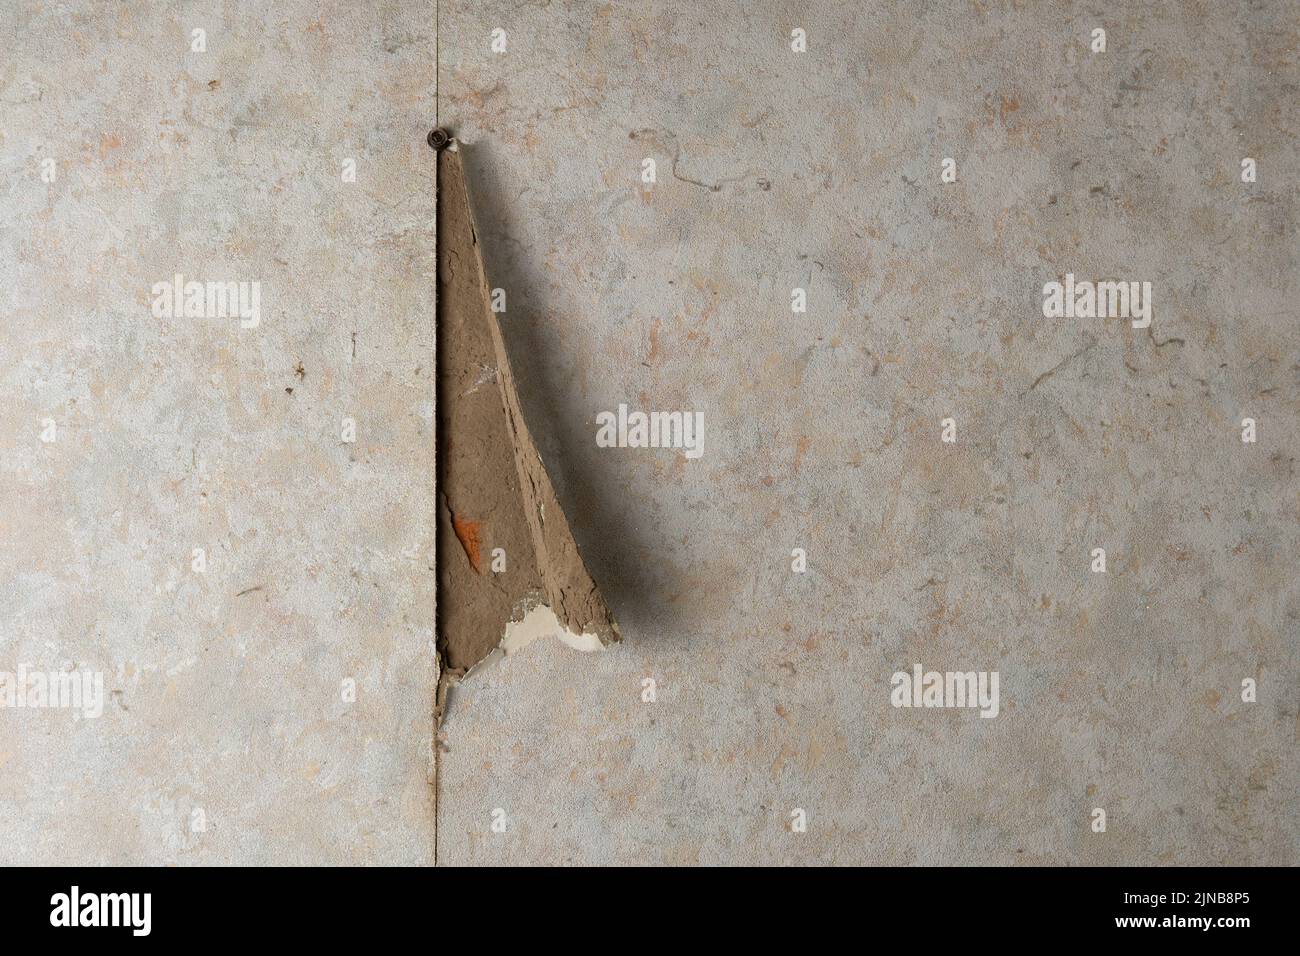 Aged room wall with torn wallpaper. Old plaster is visible from under the wallpaper. Grunge vintage background. Old house interior Stock Photo